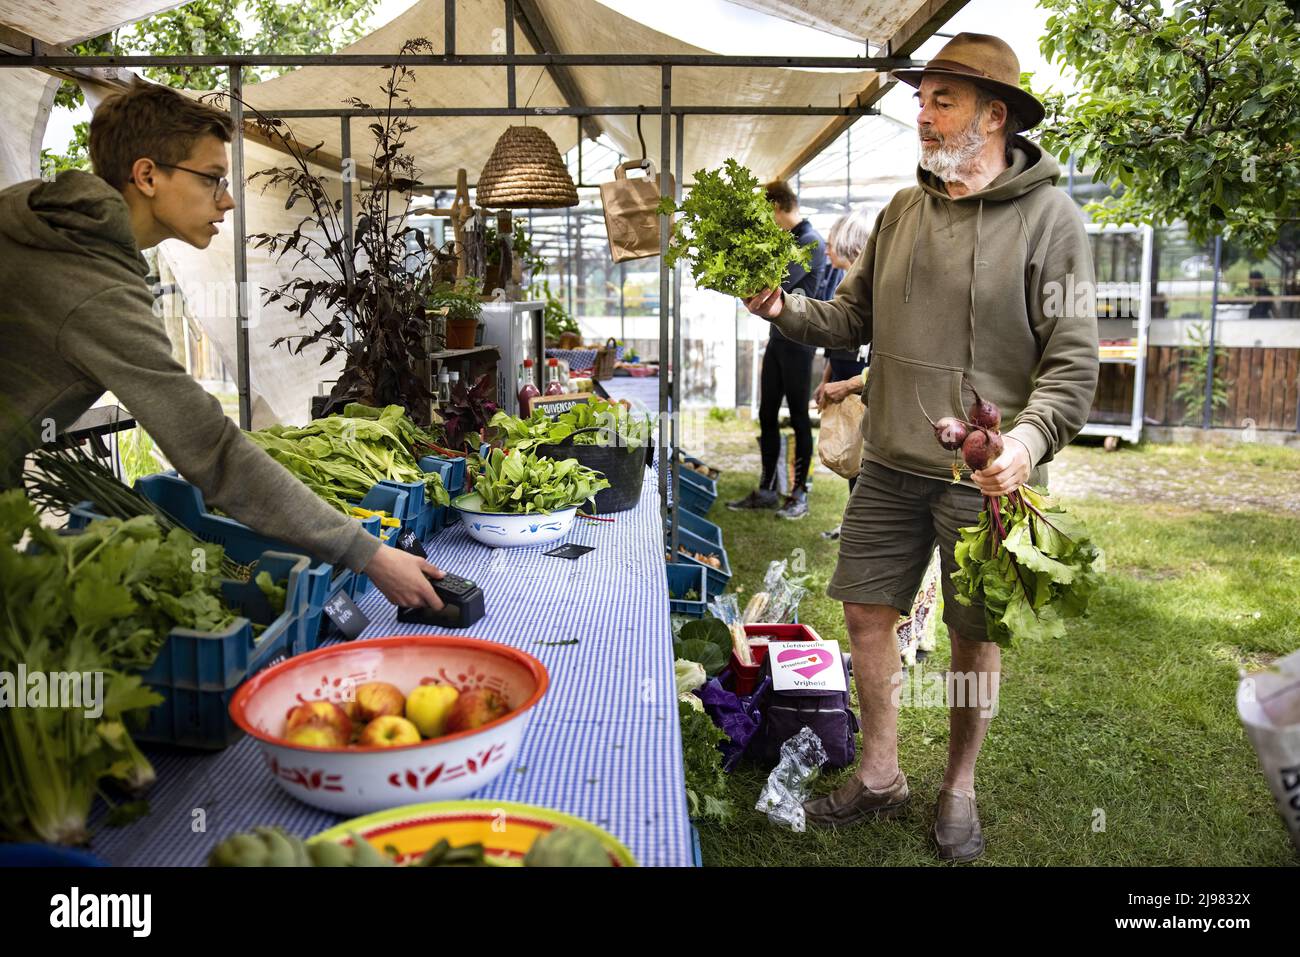 2022-05-21 11:33:33 UTRECHT - A market stall on Koningshof sells locally grown products that have been grown in a sustainable way. ANP RAMON VAN FLYMEN netherlands out - belgium out Stock Photo